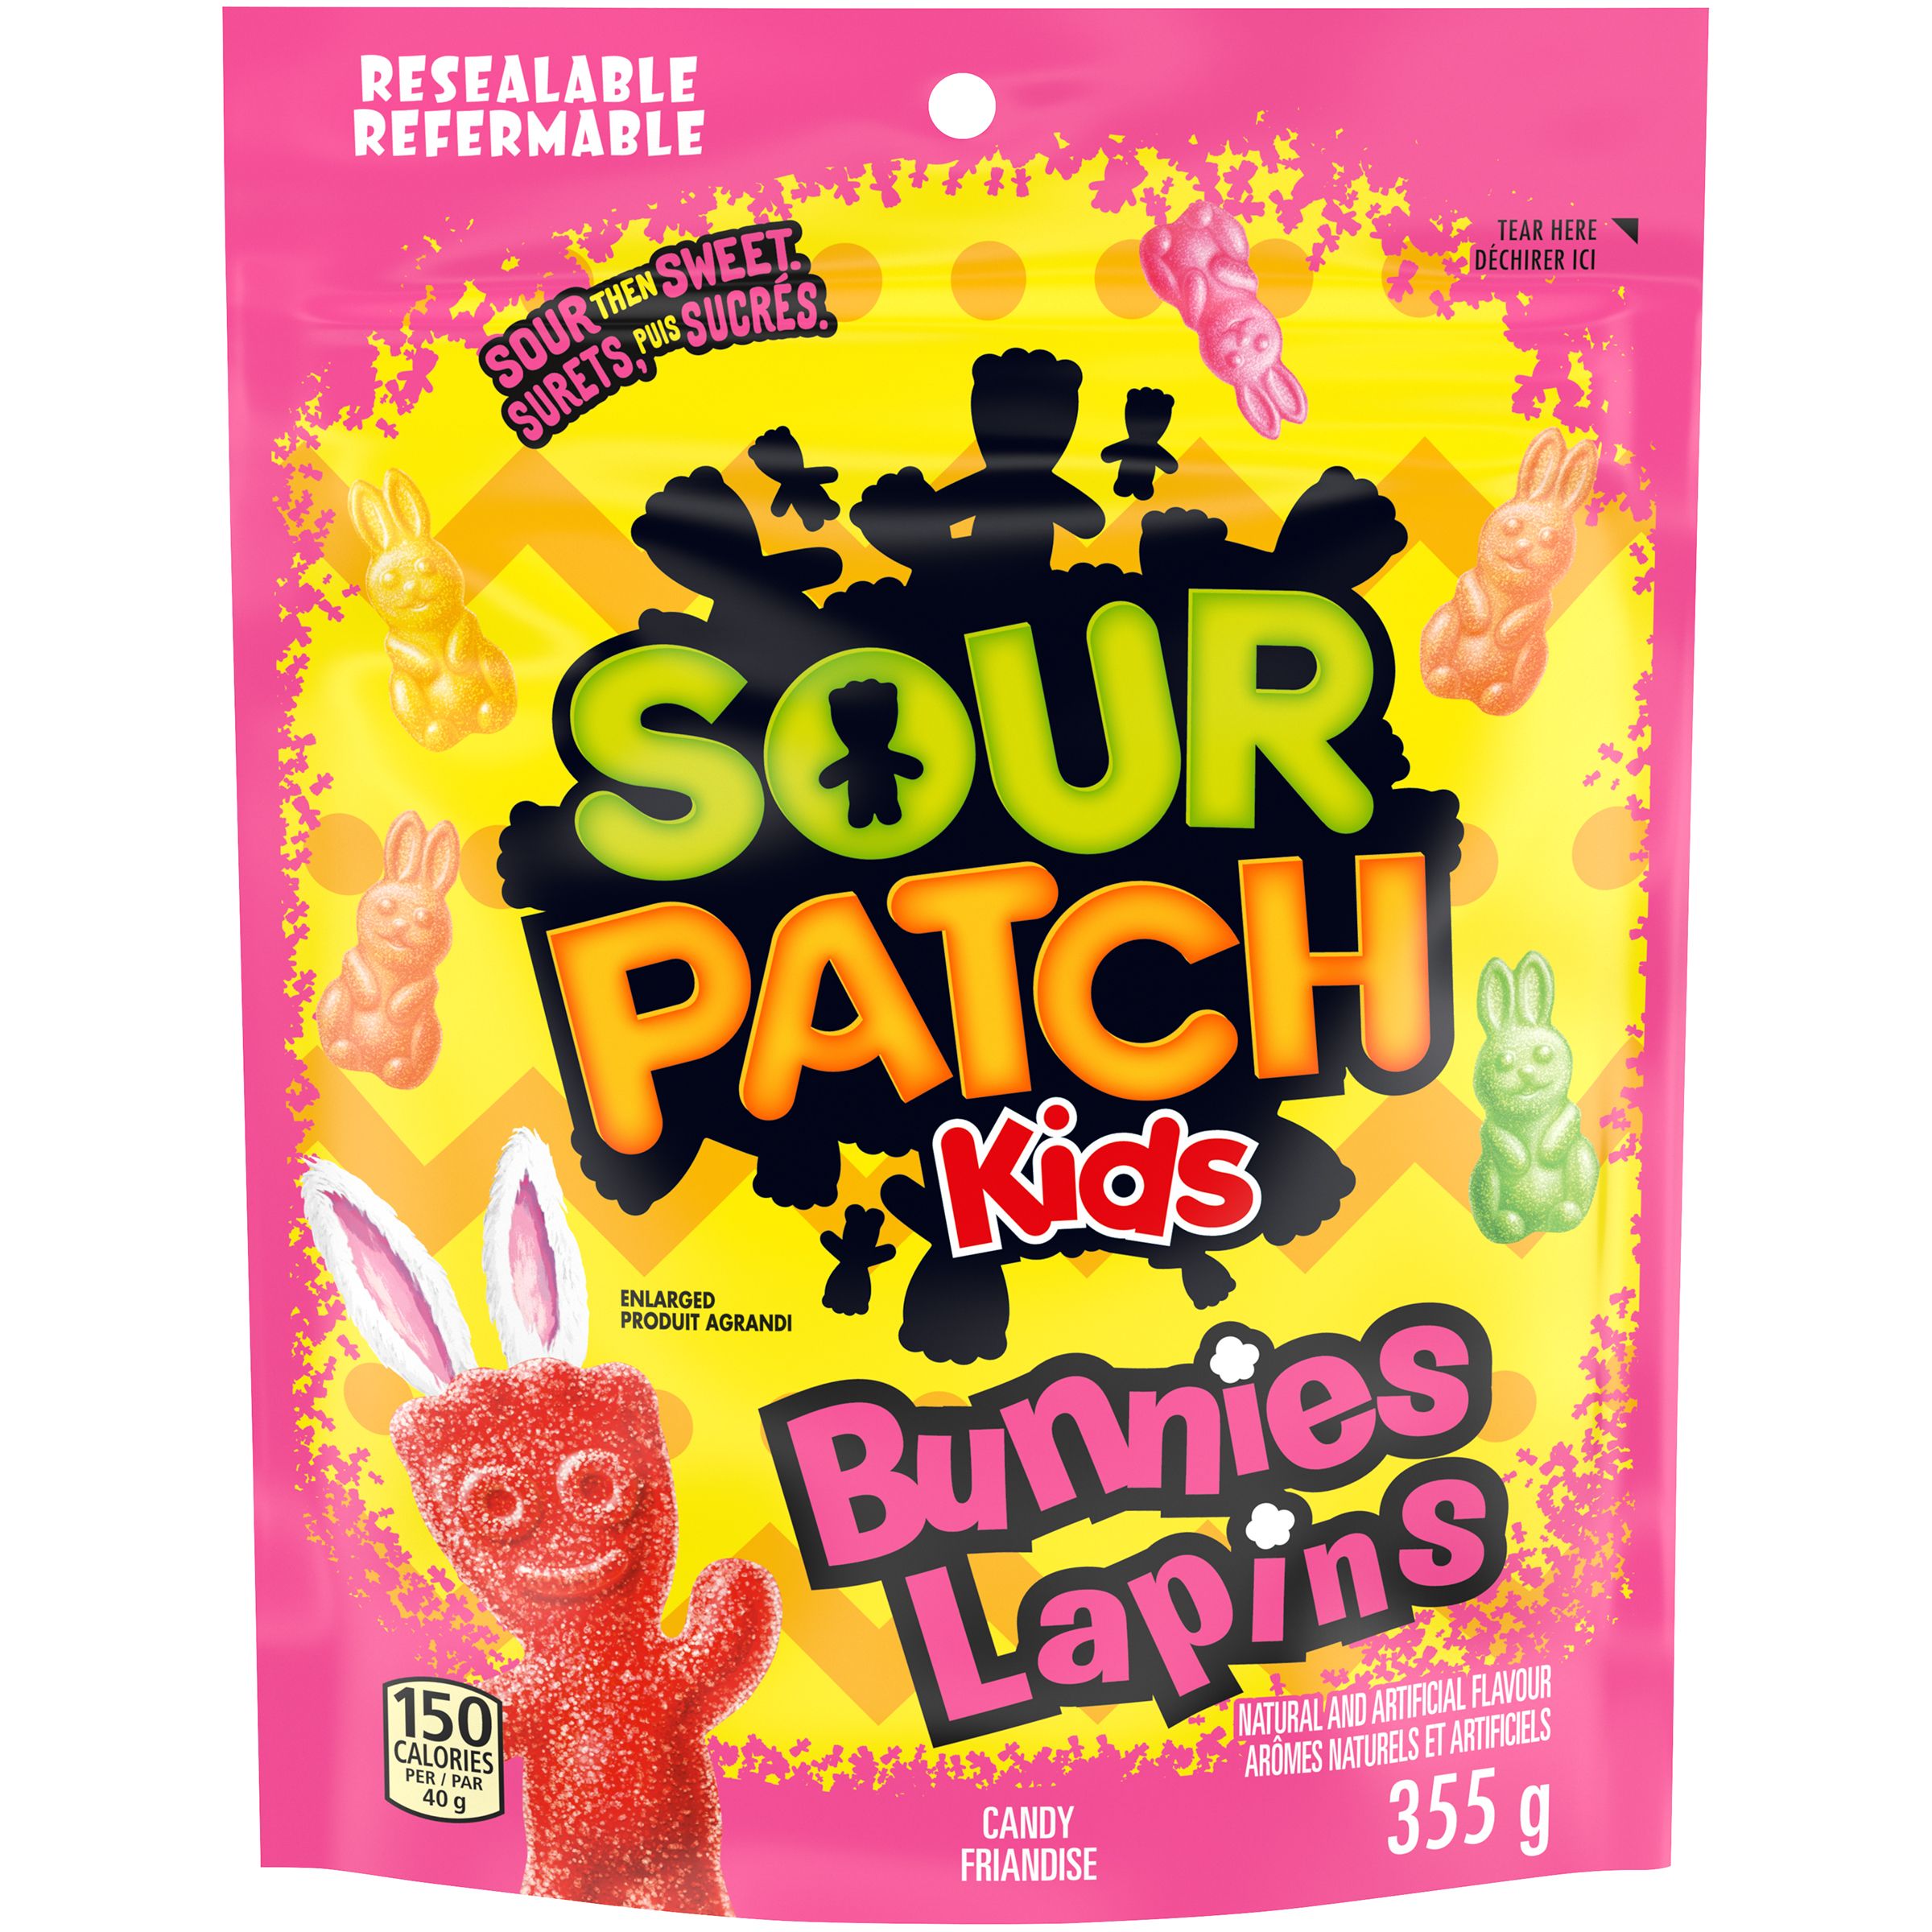 MAYNARDS Sour Patch Kids Bunnies Candy for Easter (Resealable Pack, 355 g)-1